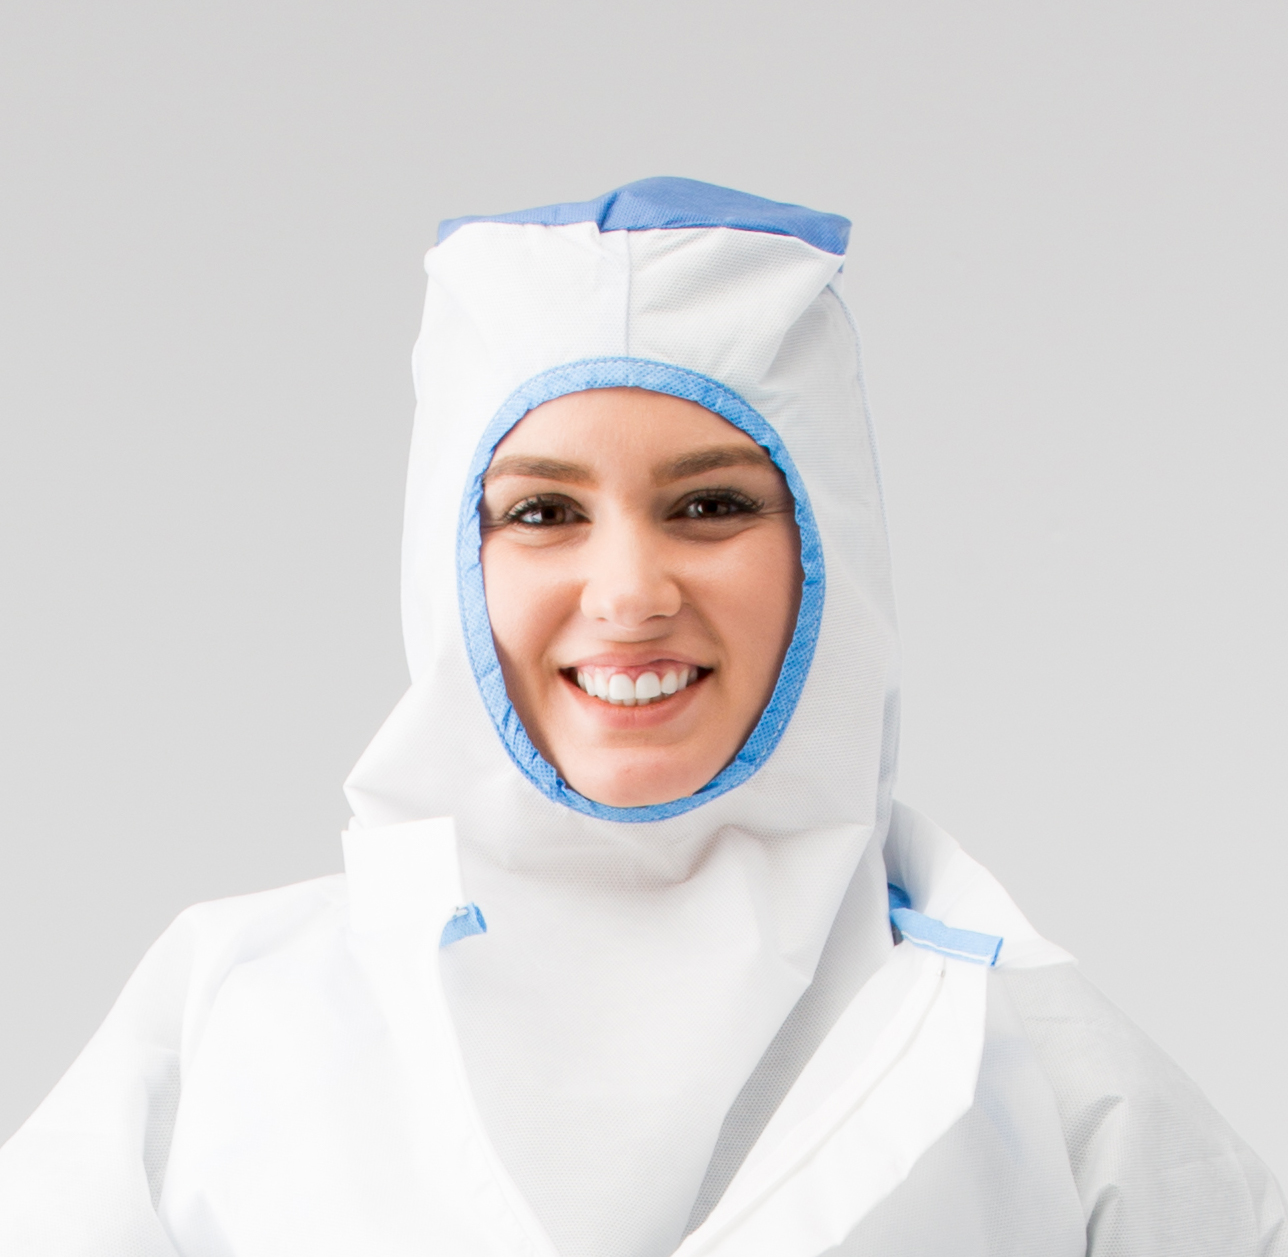 A lady wearing a sterile hood in a cleanroom